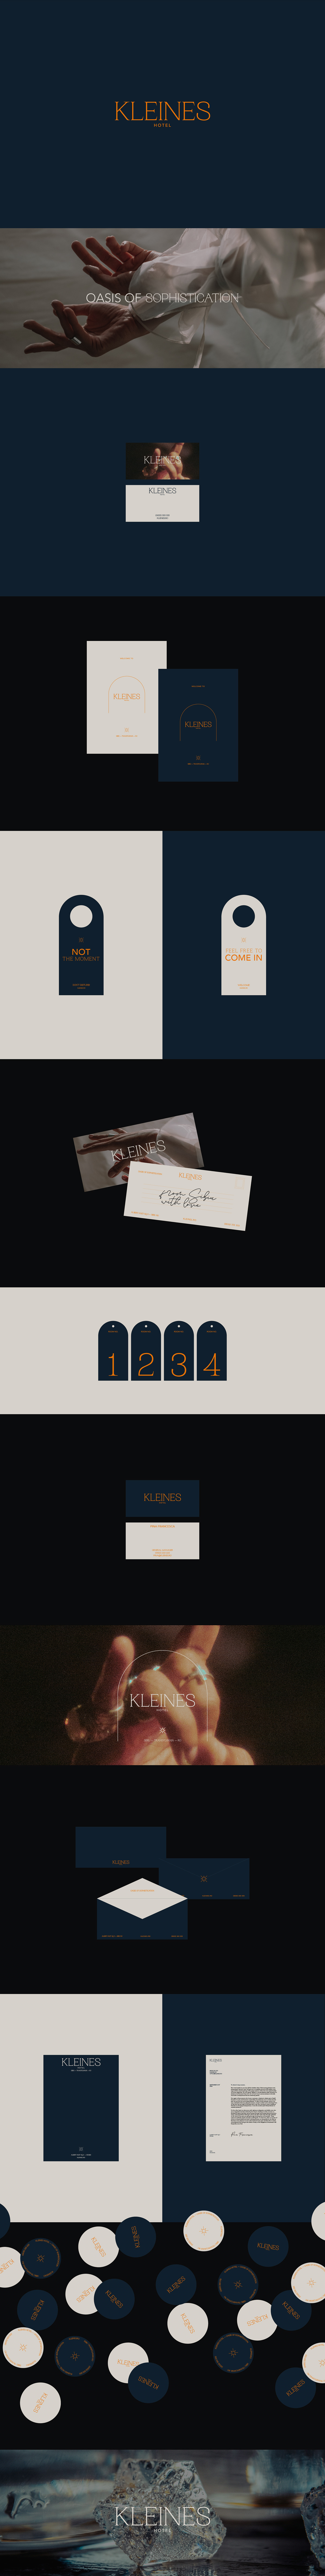 #Boutique #Branding #graphicDesign #Hospitality #hotel #luxury #romania #sophistication